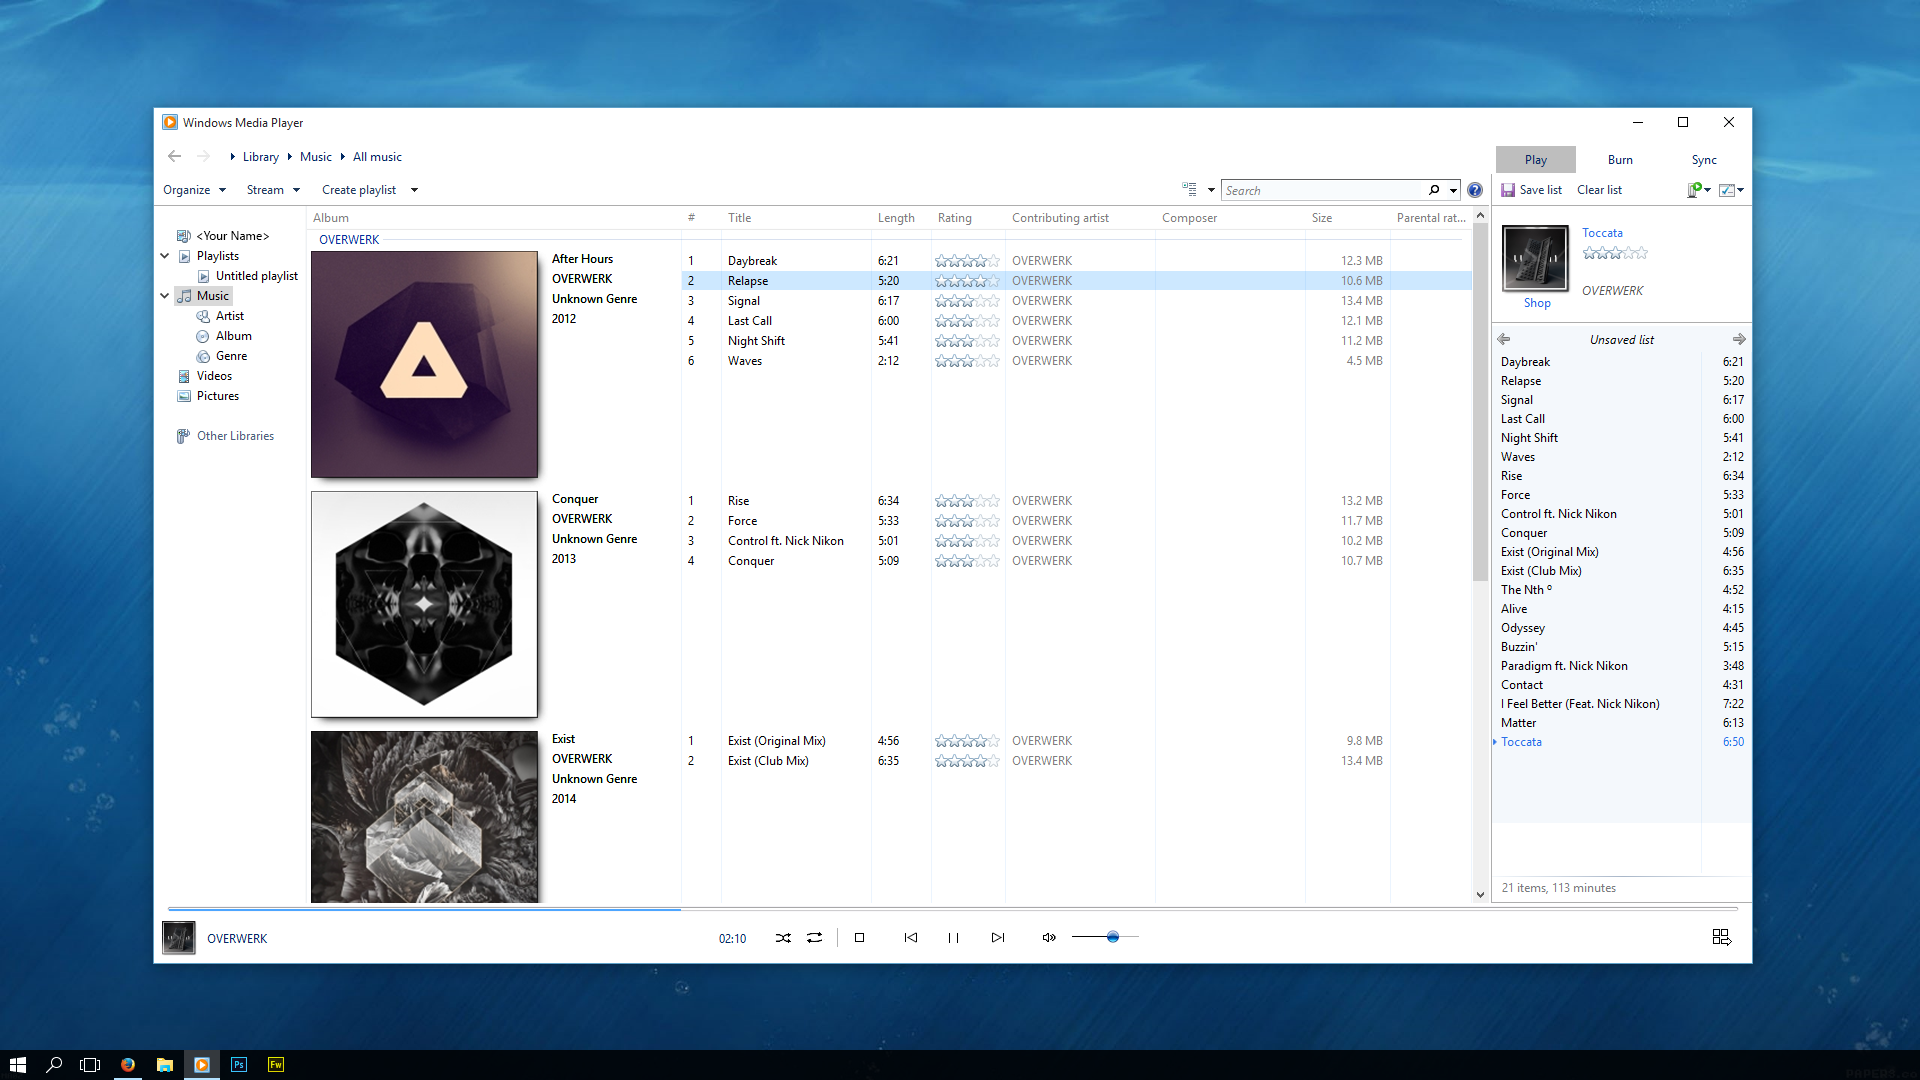 Windows Media Player For Windows 8.1 Free Download